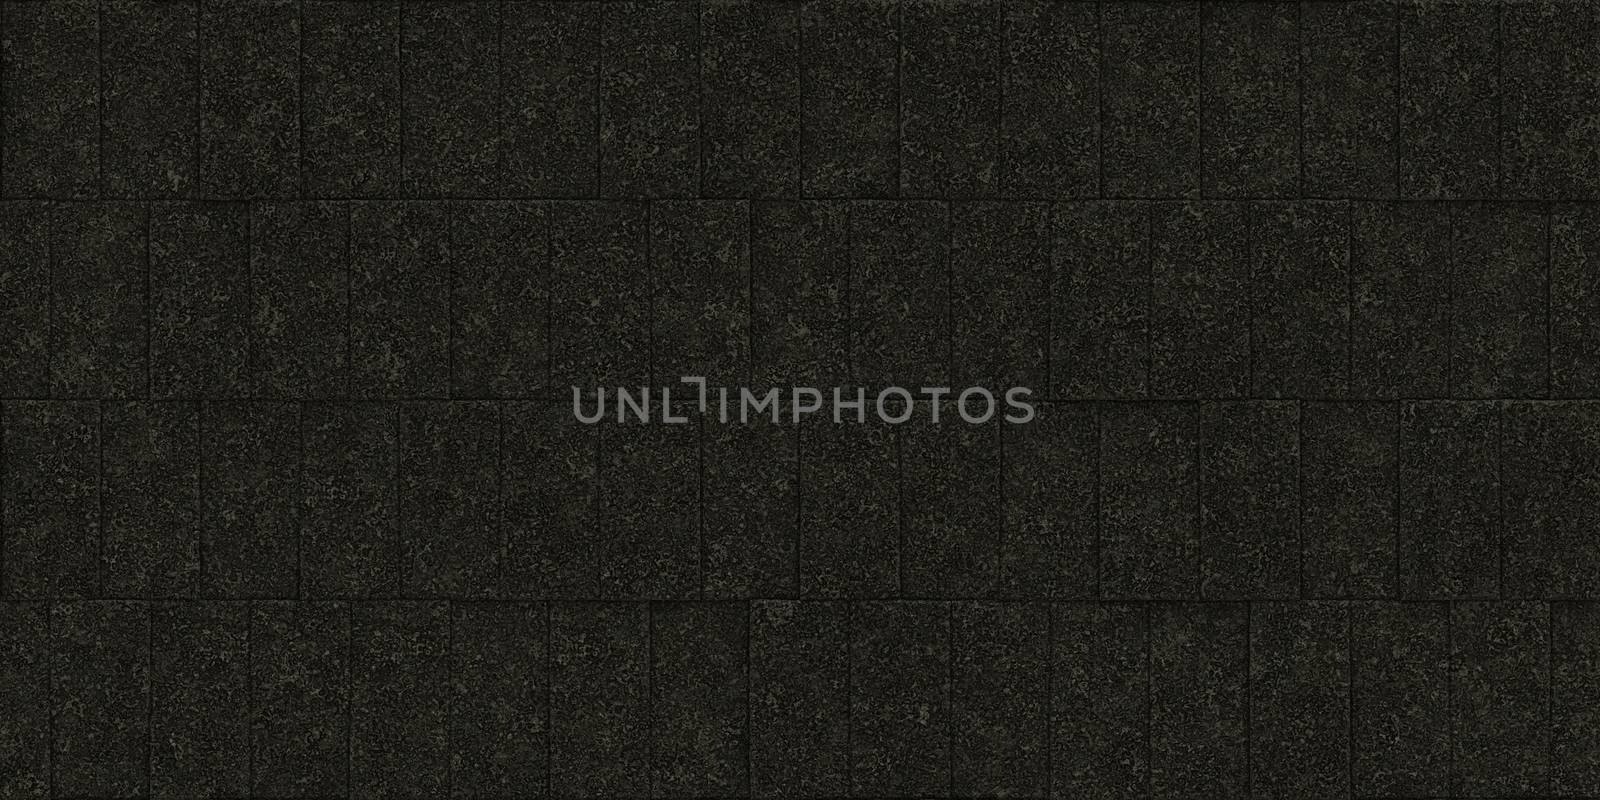 Black Seamless Stone Block Wall Texture. Building Facade Background. Exterior Architecture Decorative House Facing.